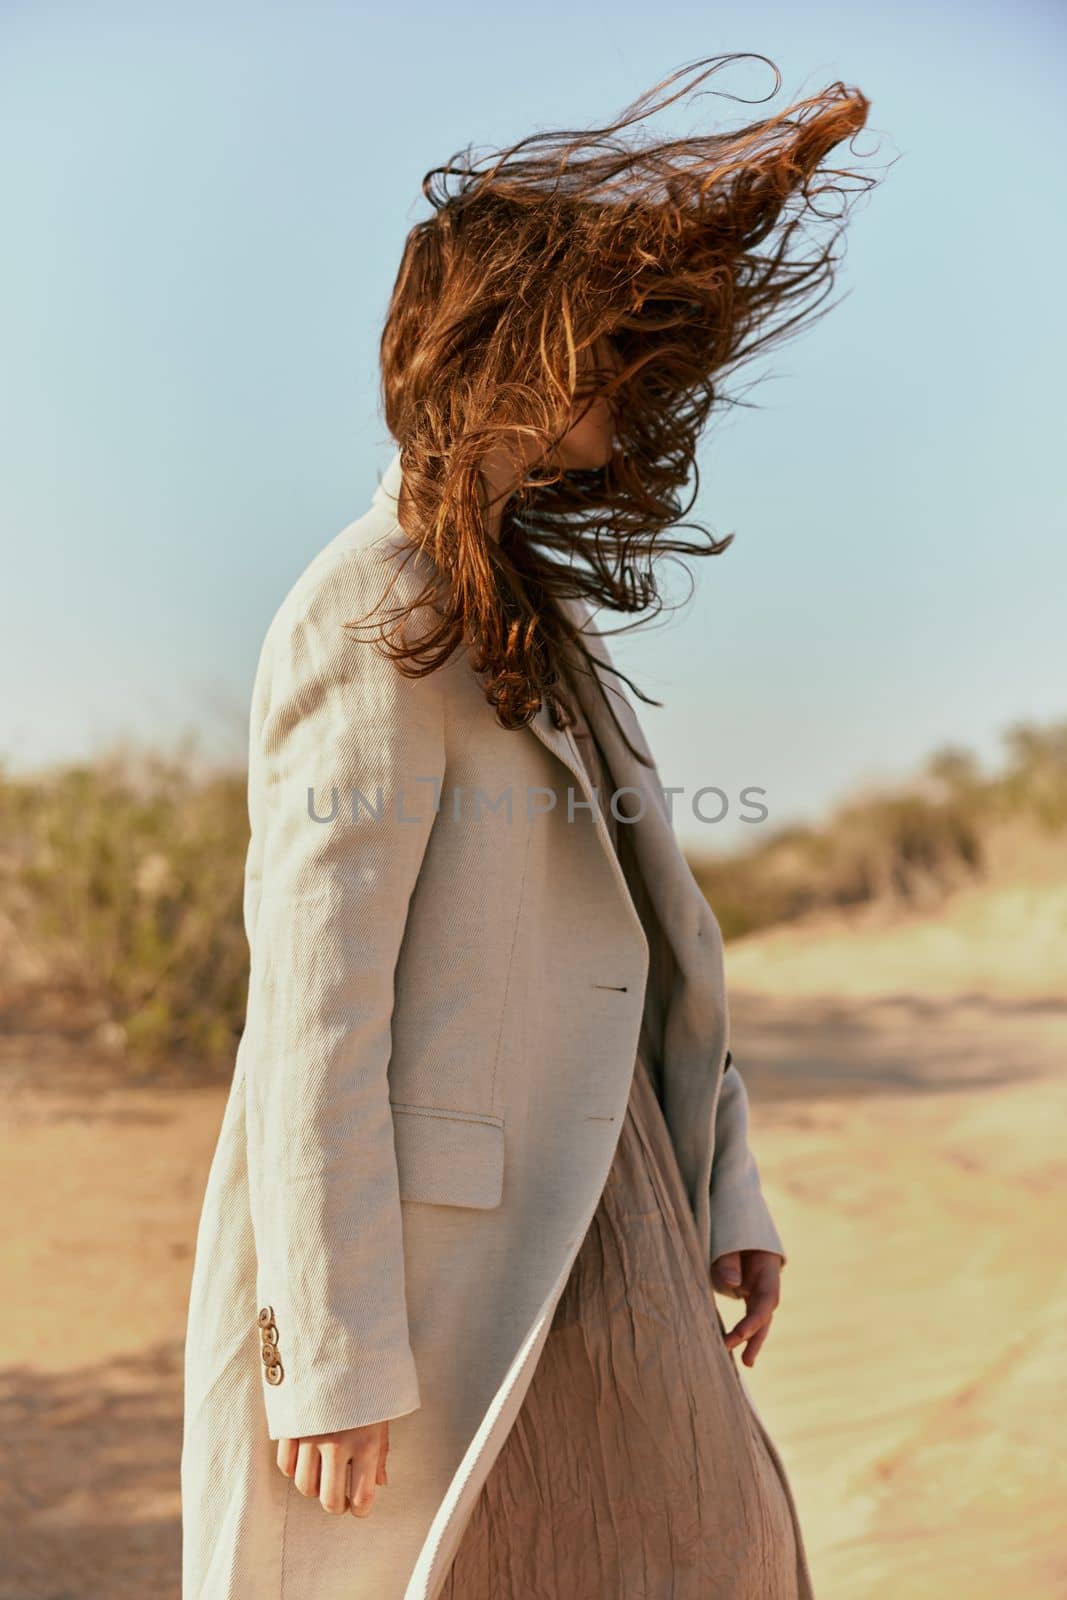 portrait of a woman in a light jacket with hair covering her face from the wind by Vichizh